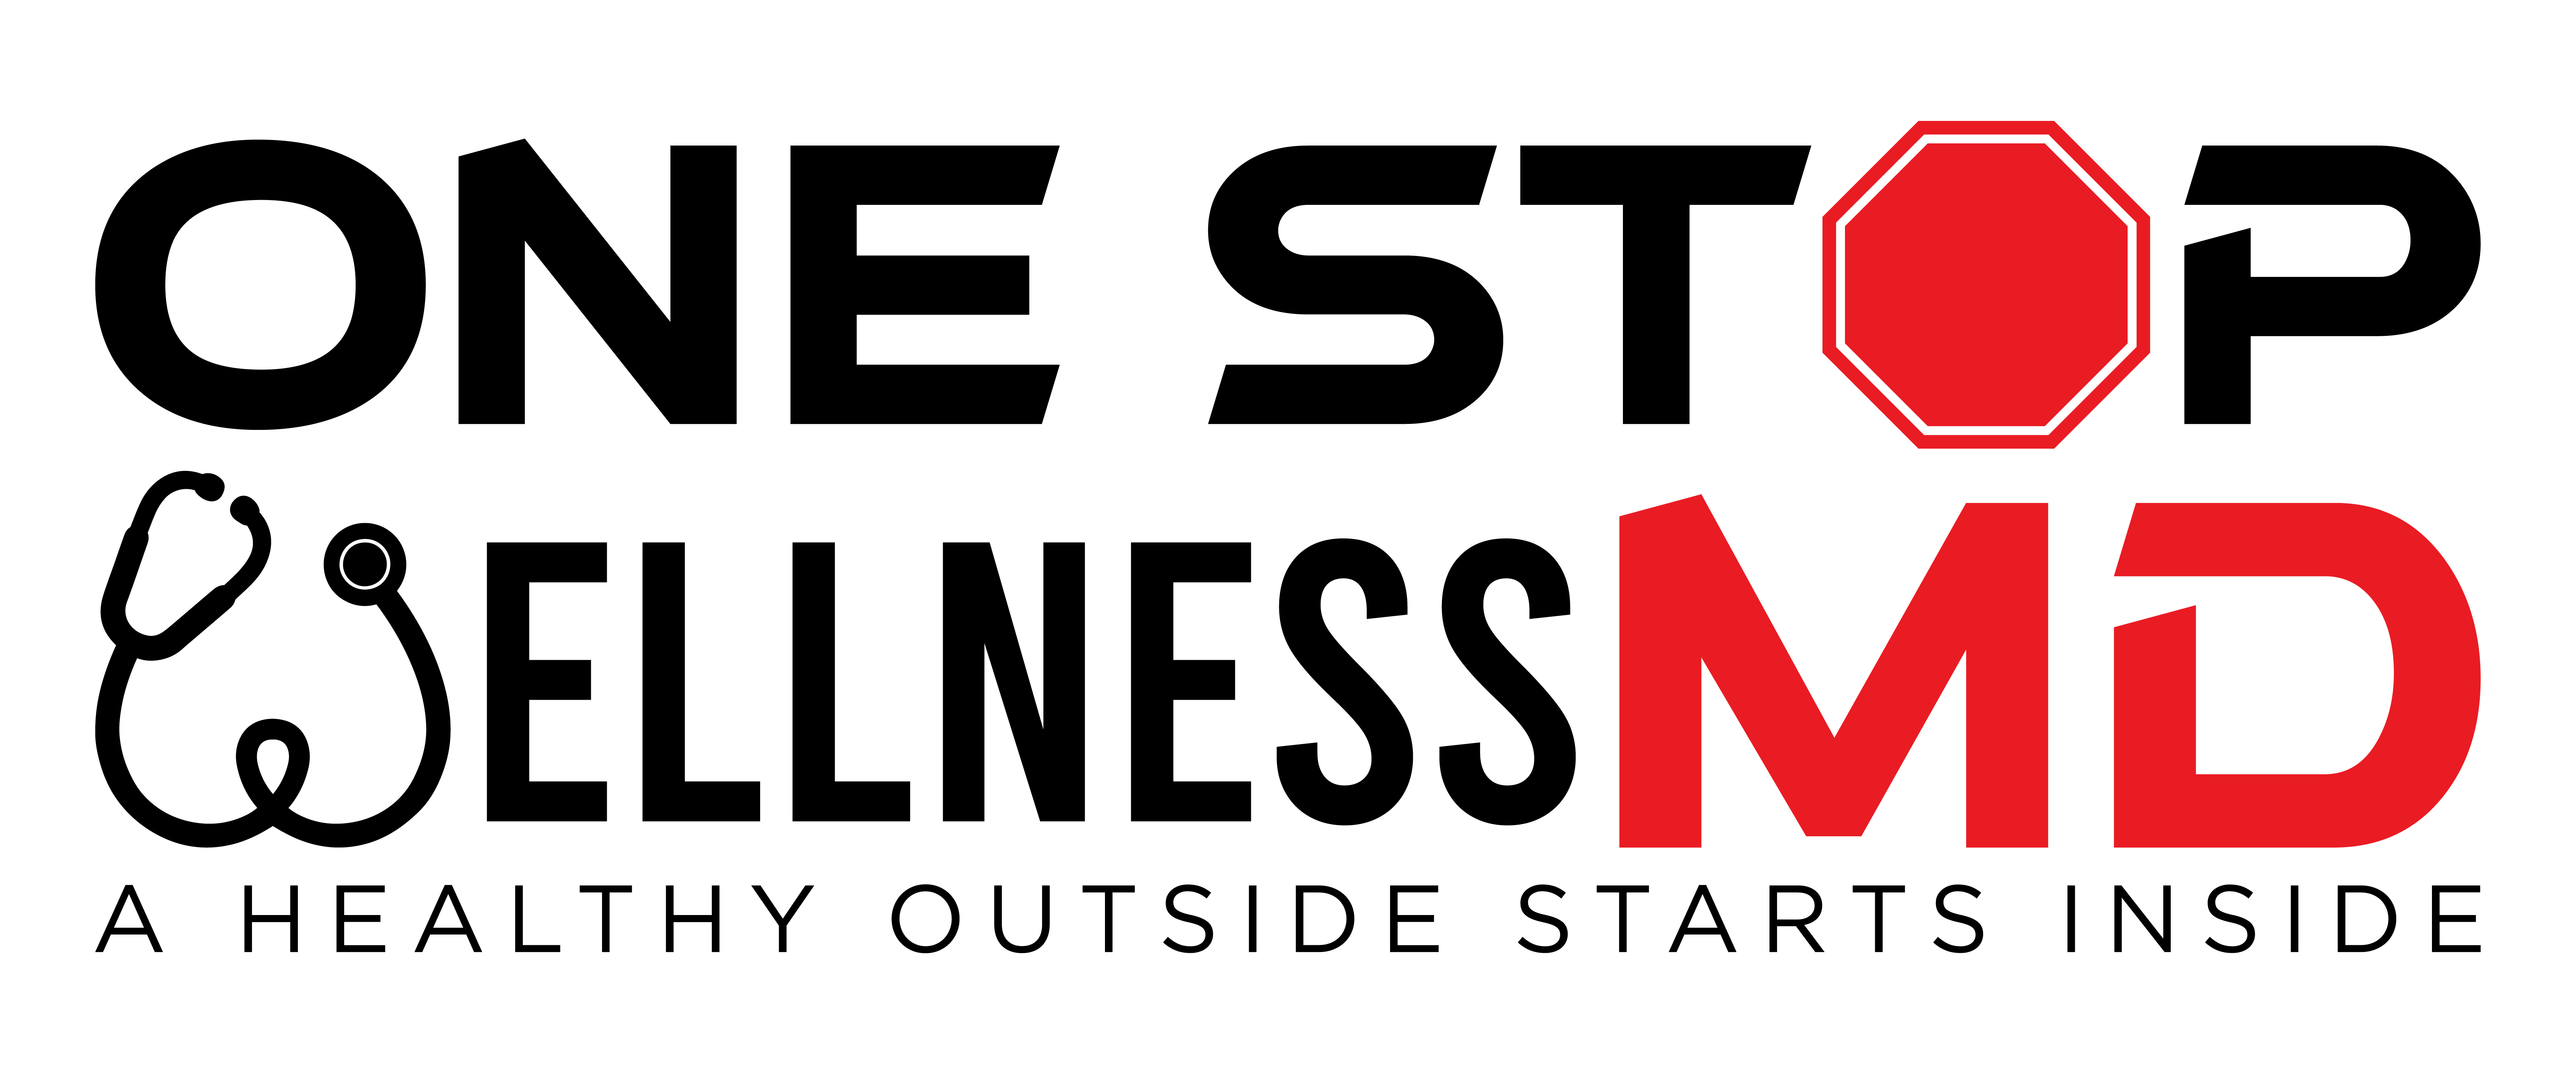 One Stop Wellness MD